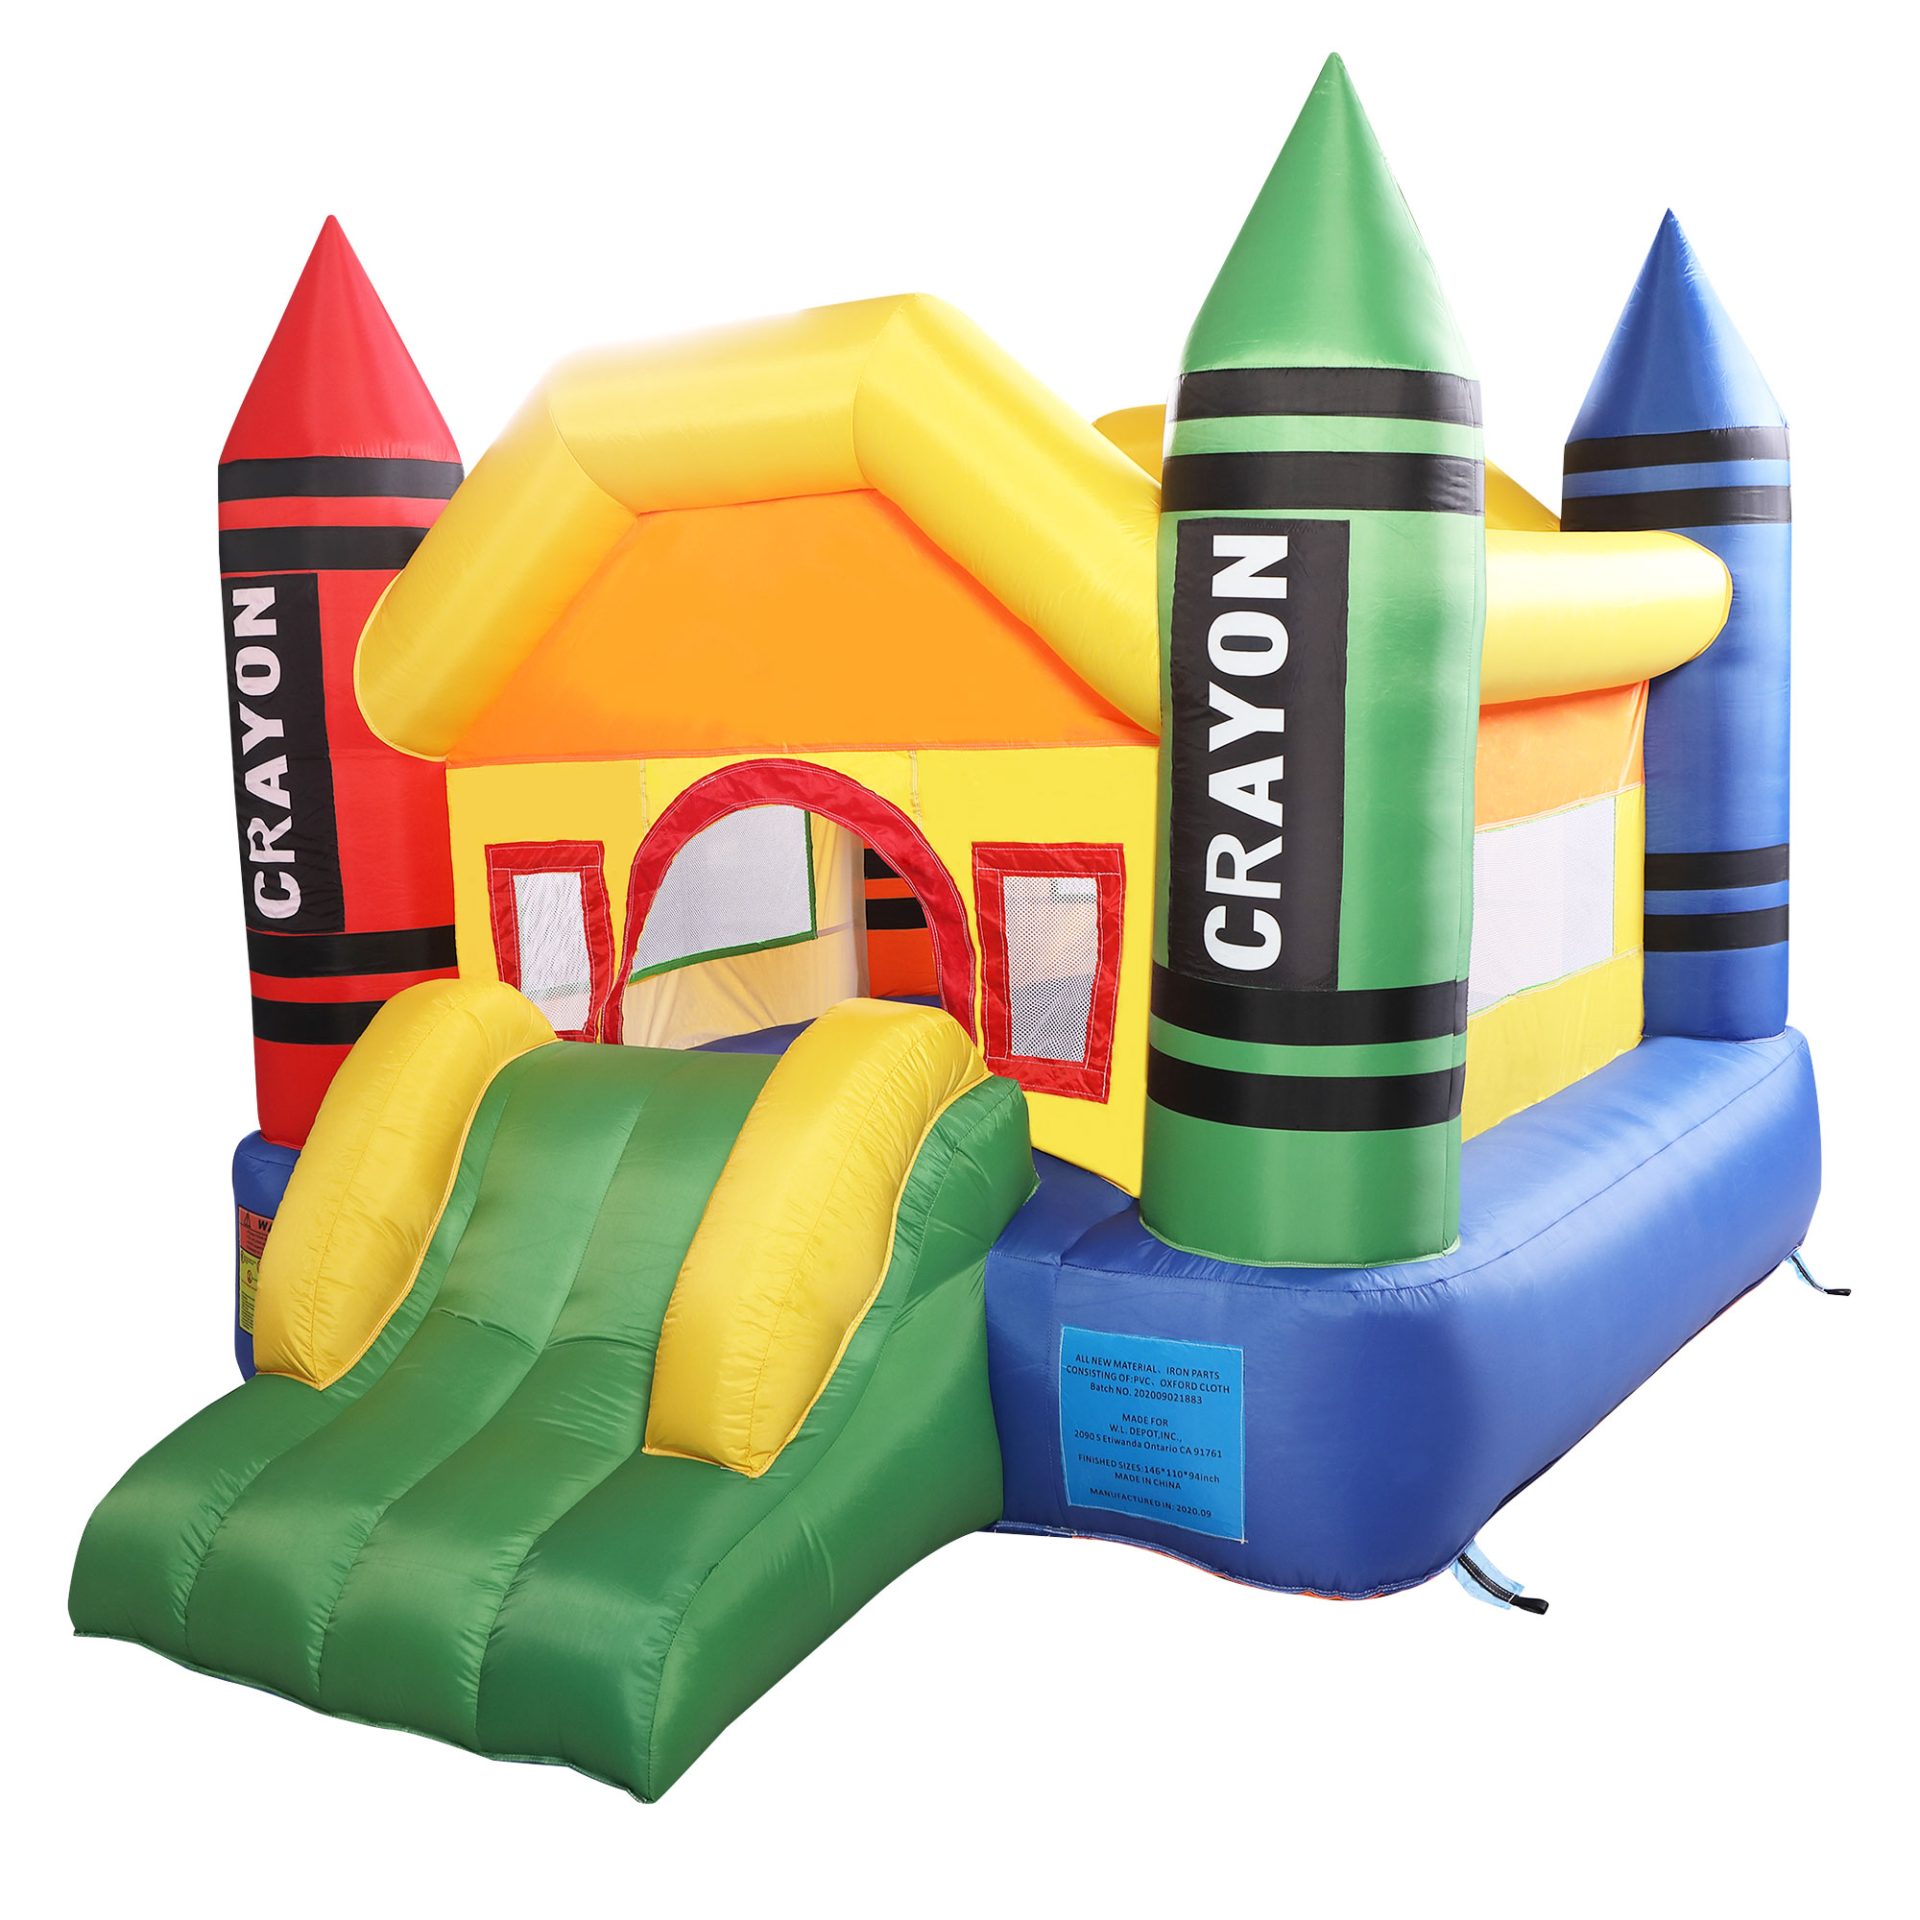 Nyeekoy Inflatable Bounce House, Kid Jump Castle Bouncer with Slide and Mesh Wall, Including Carry Bag, Repair Kit, Stake, for Children 3-10 (Without Blower) TH17G0161 4